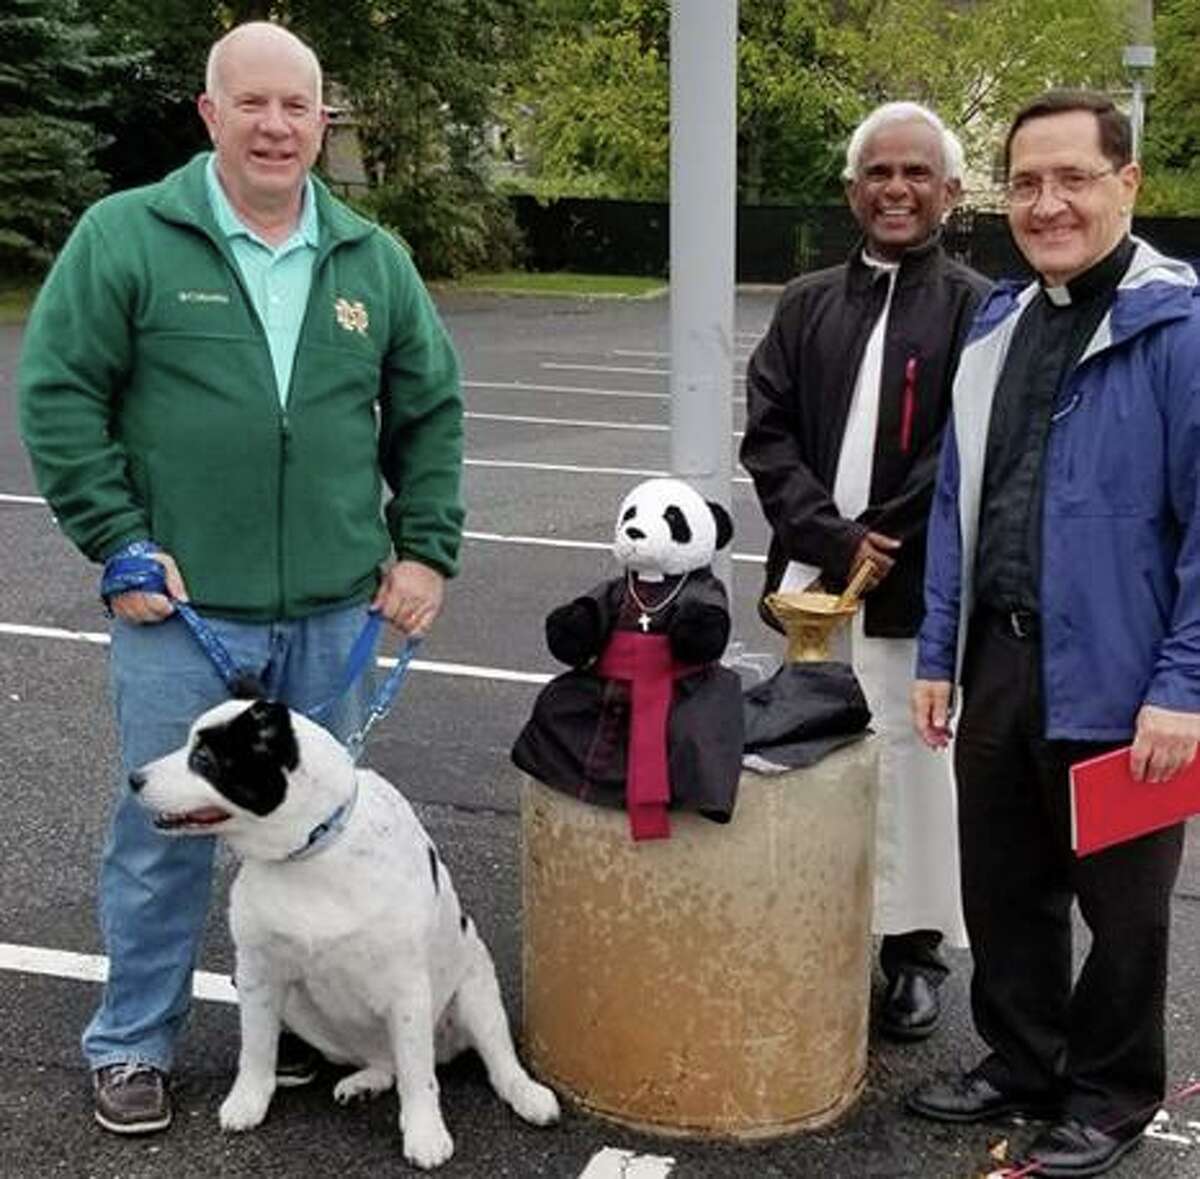 A St. Mary parishioner with his dog, left, stands with Monsignor Kevin Royal and Fr. Lourduraj at the church’s Blessing of the Animals ceremony on Sunday, Oct. 6.